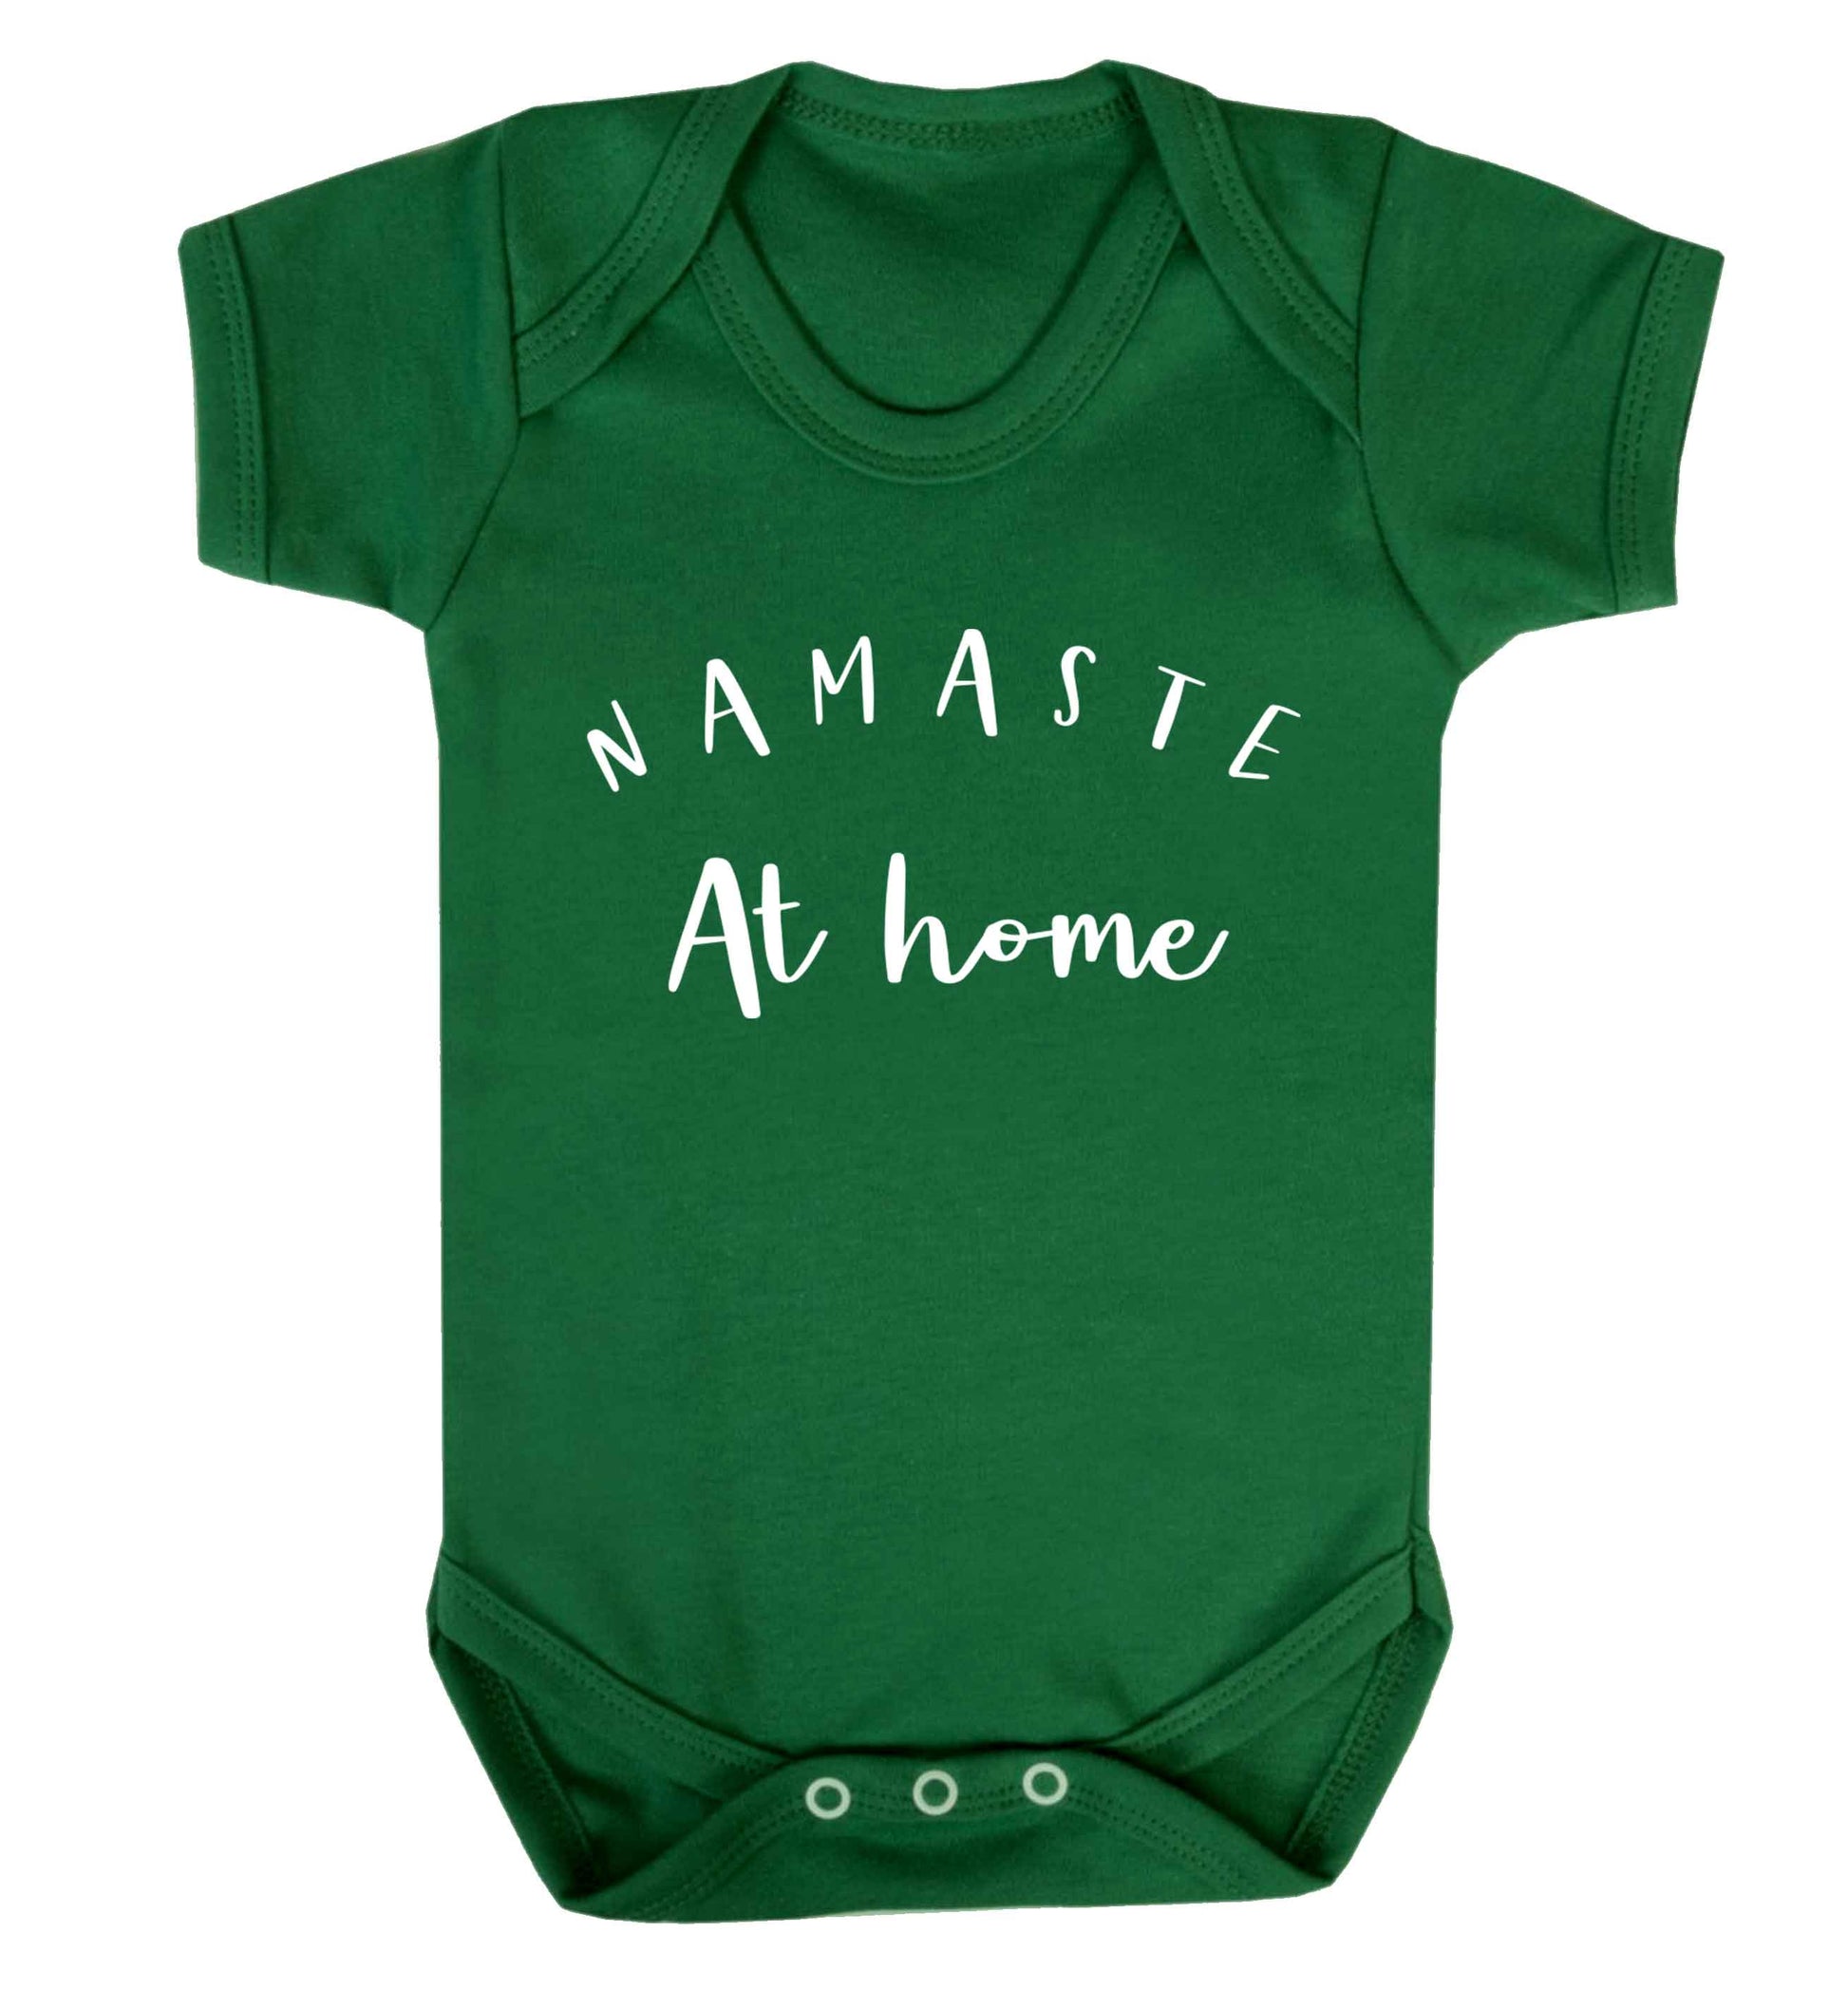 Namaste at home Baby Vest green 18-24 months